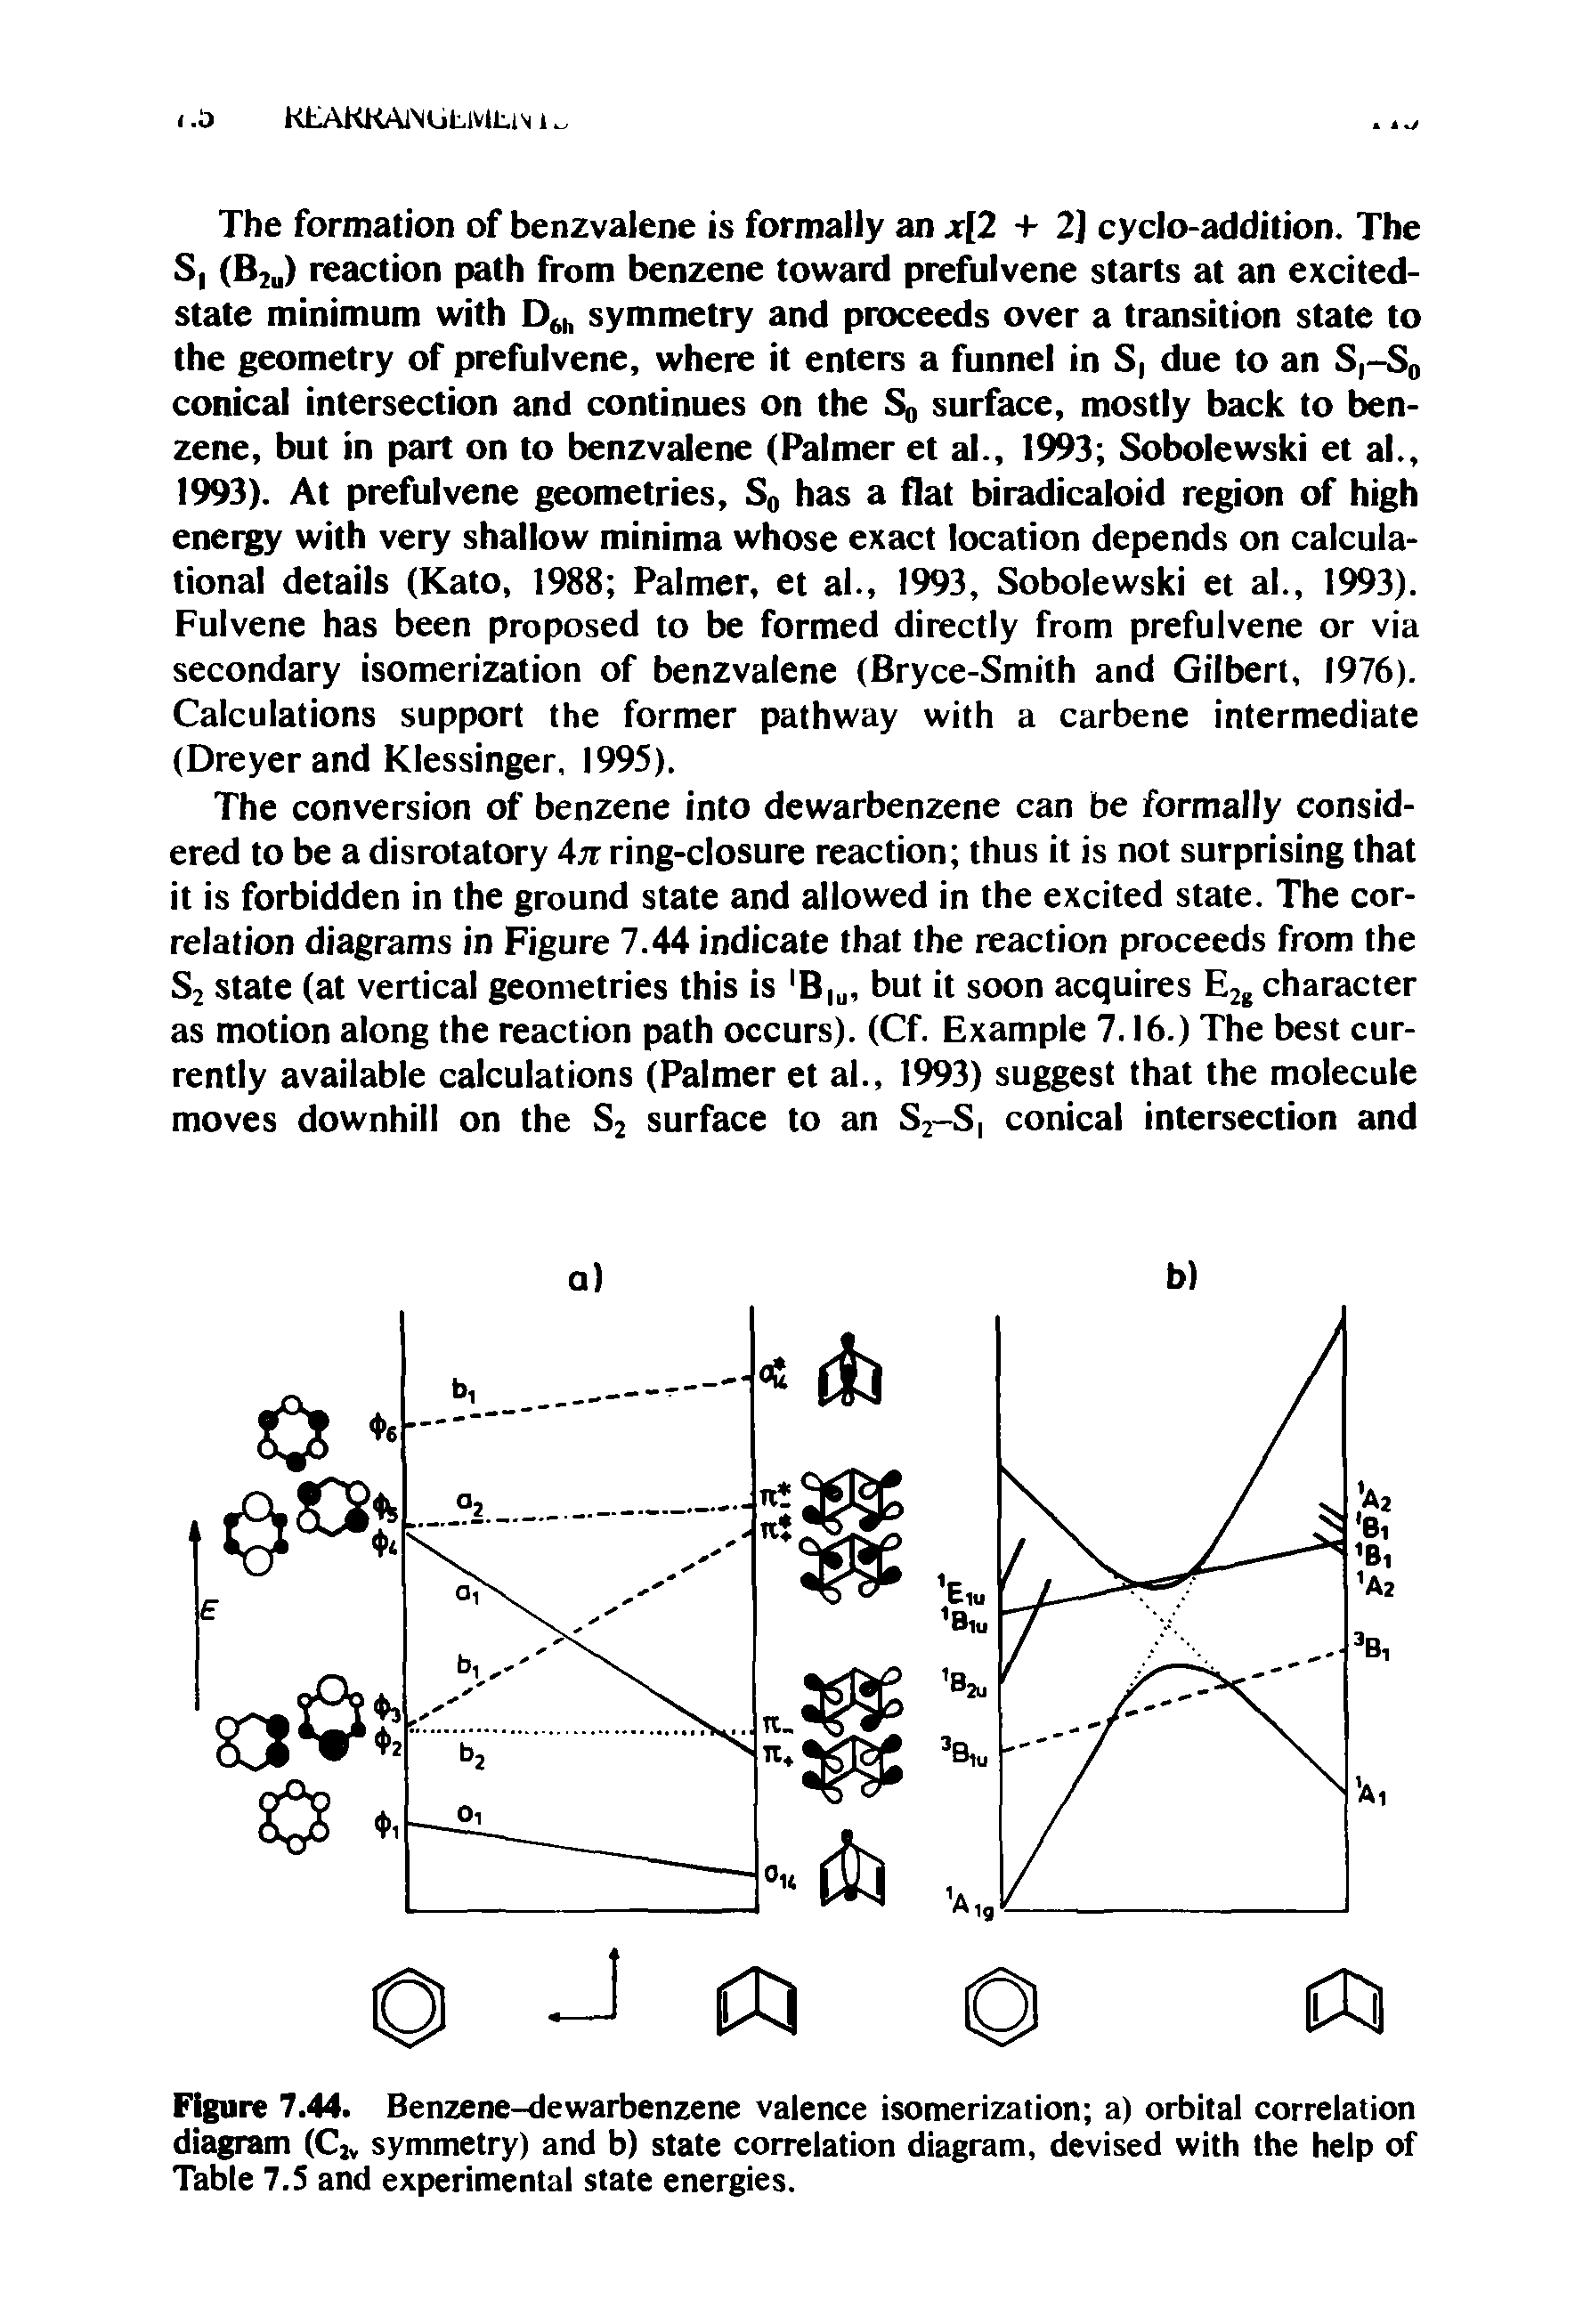 Figure 7.44. Benzene-dewarbenzene valence isomerization a) orbital correlation diagram (Cj, symmetry) and b) state correlation diagram, devised with the help of Table 7.5 and experimental state energies.